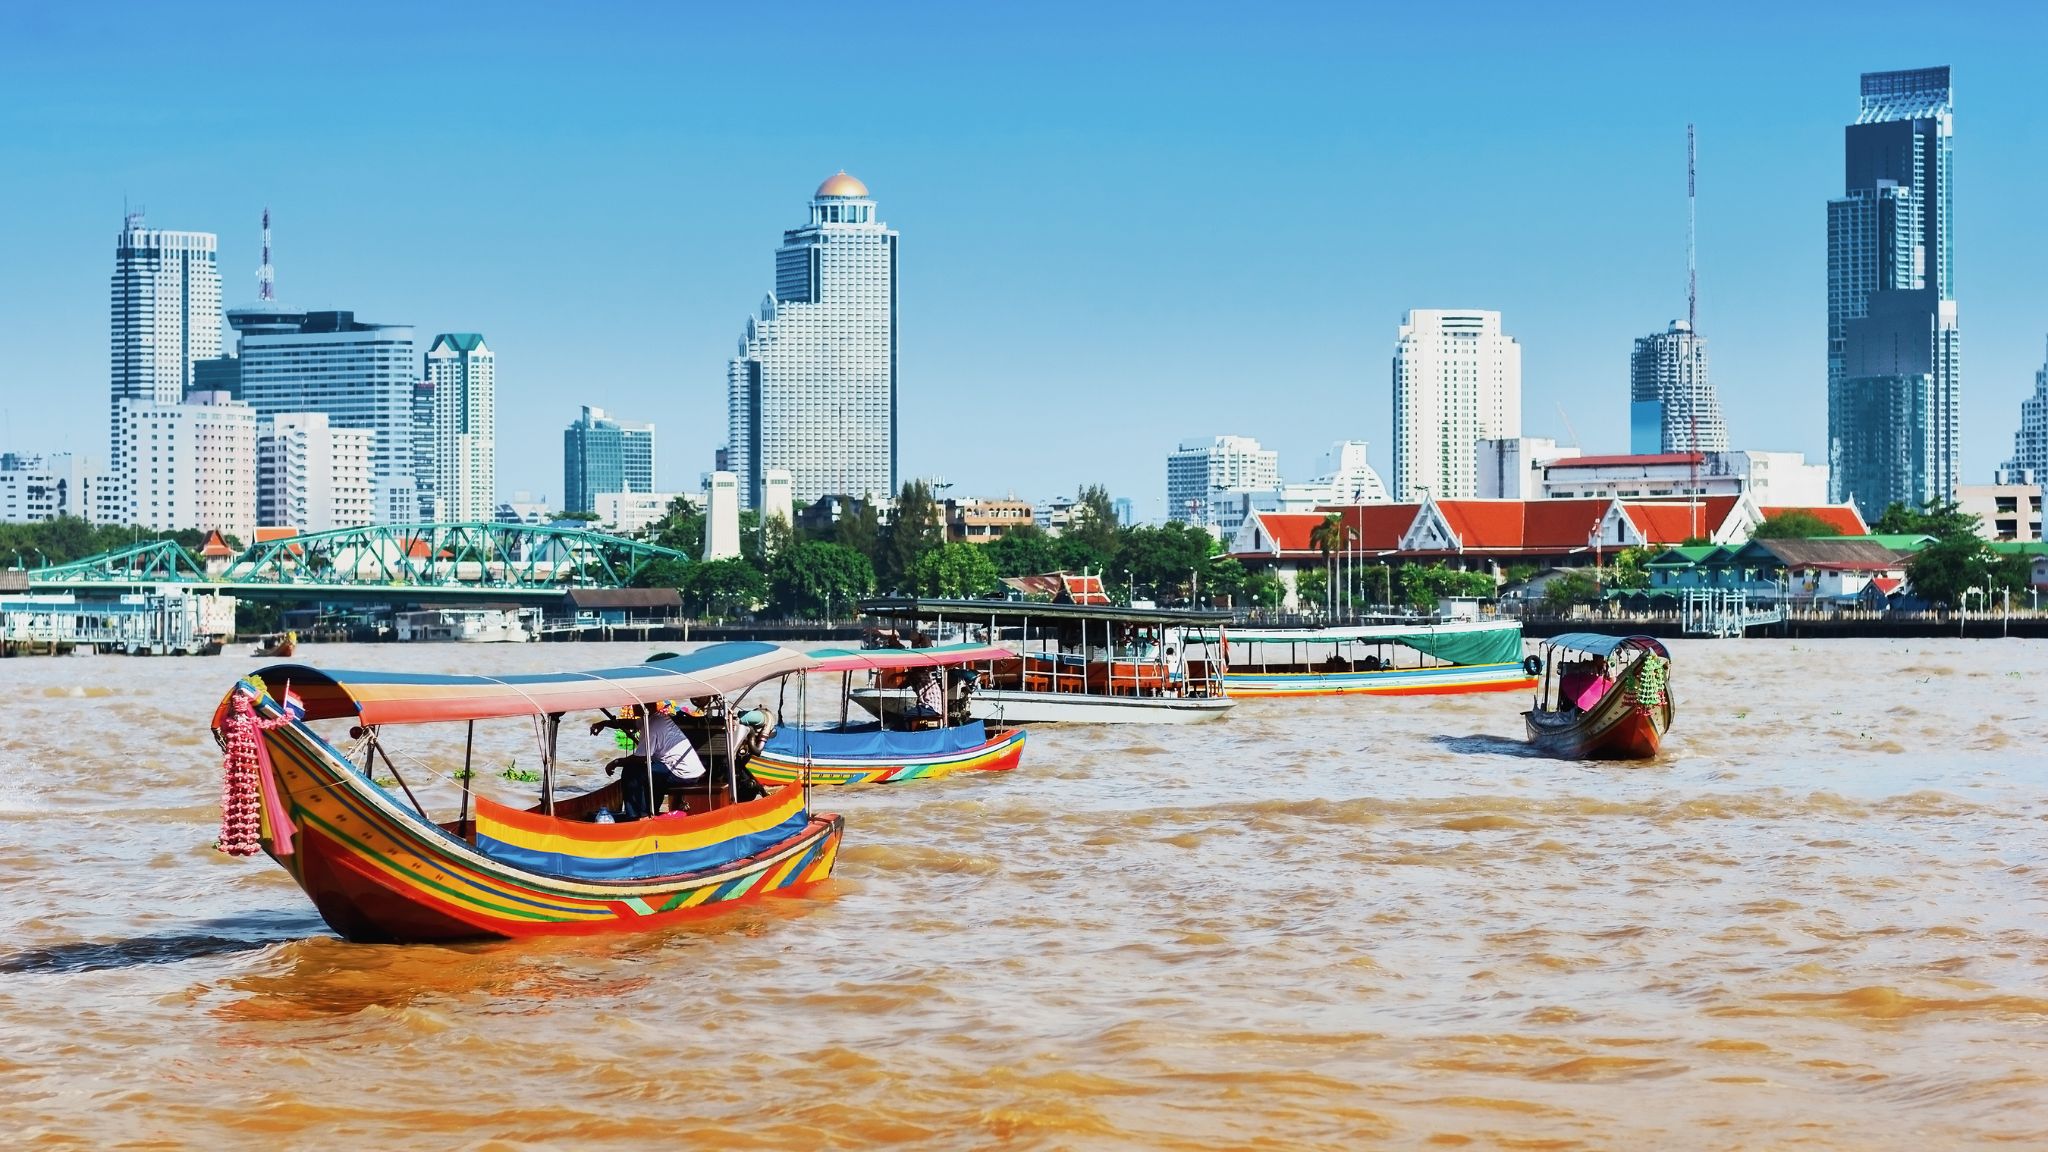 Day 2 Embark On A Boat Trip Through Chao Phraya River